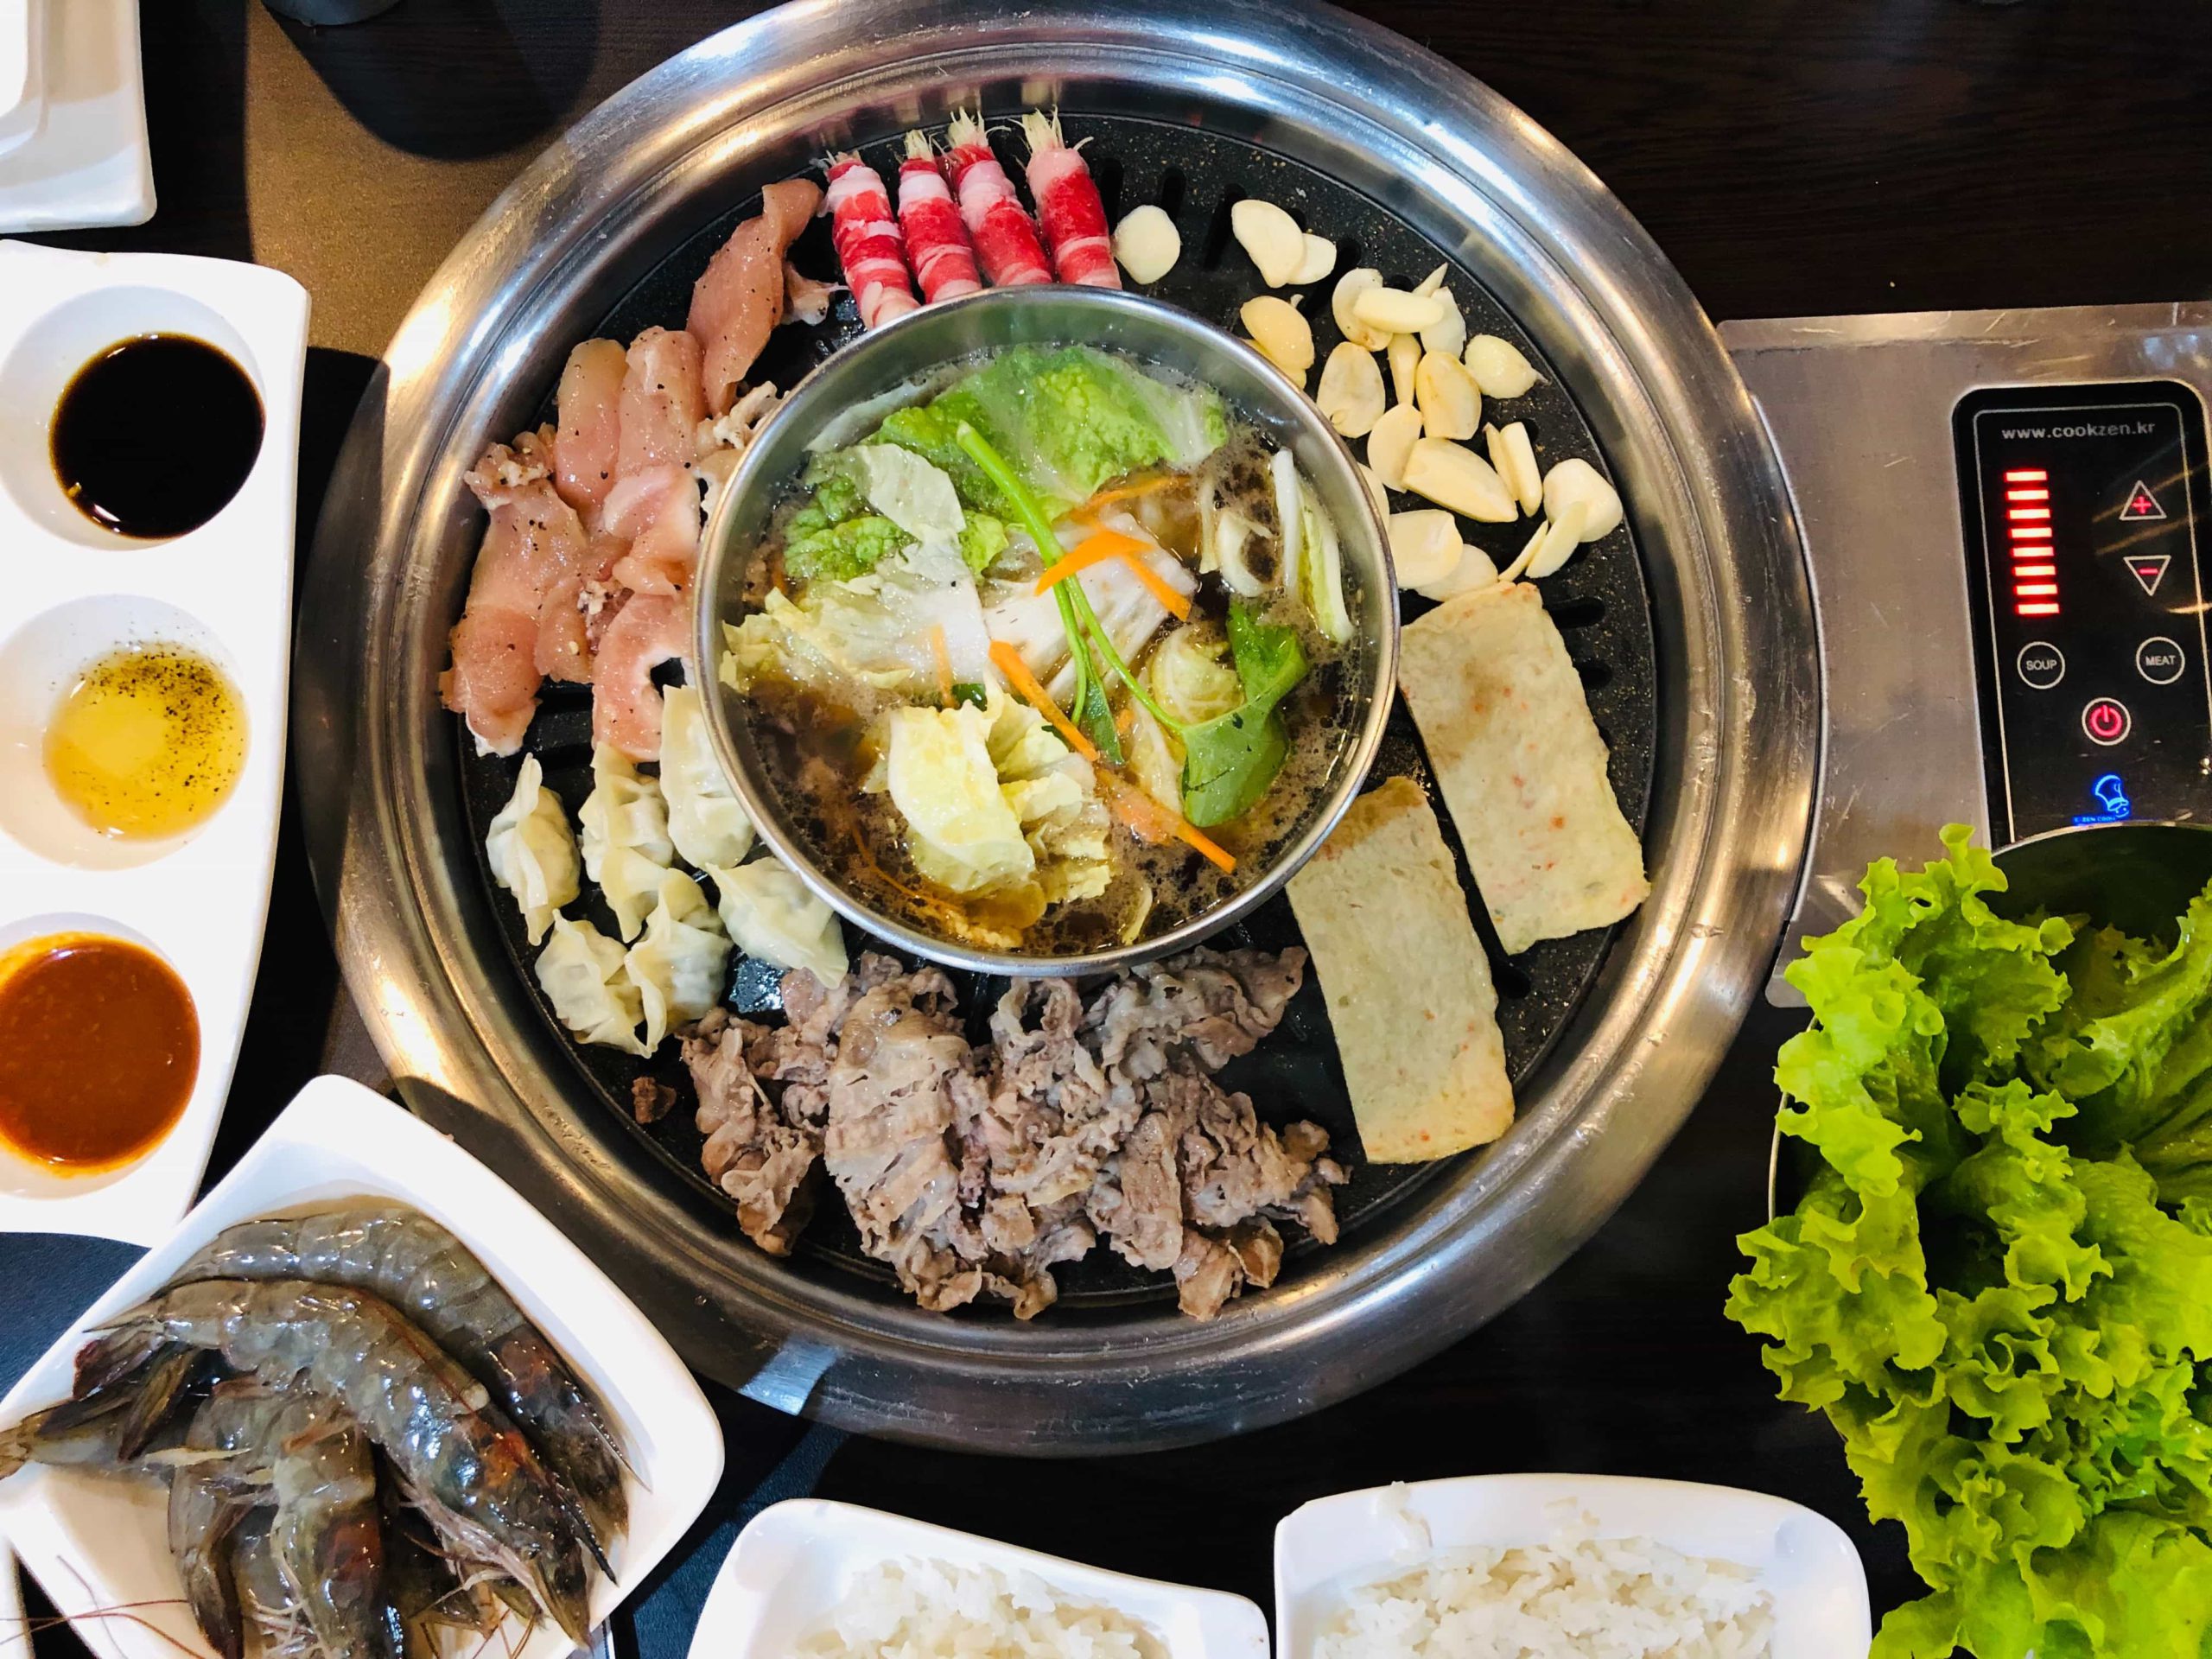 China’s biggest hotpot chain Haidilao’s ambitious expansion plans land it in hot water